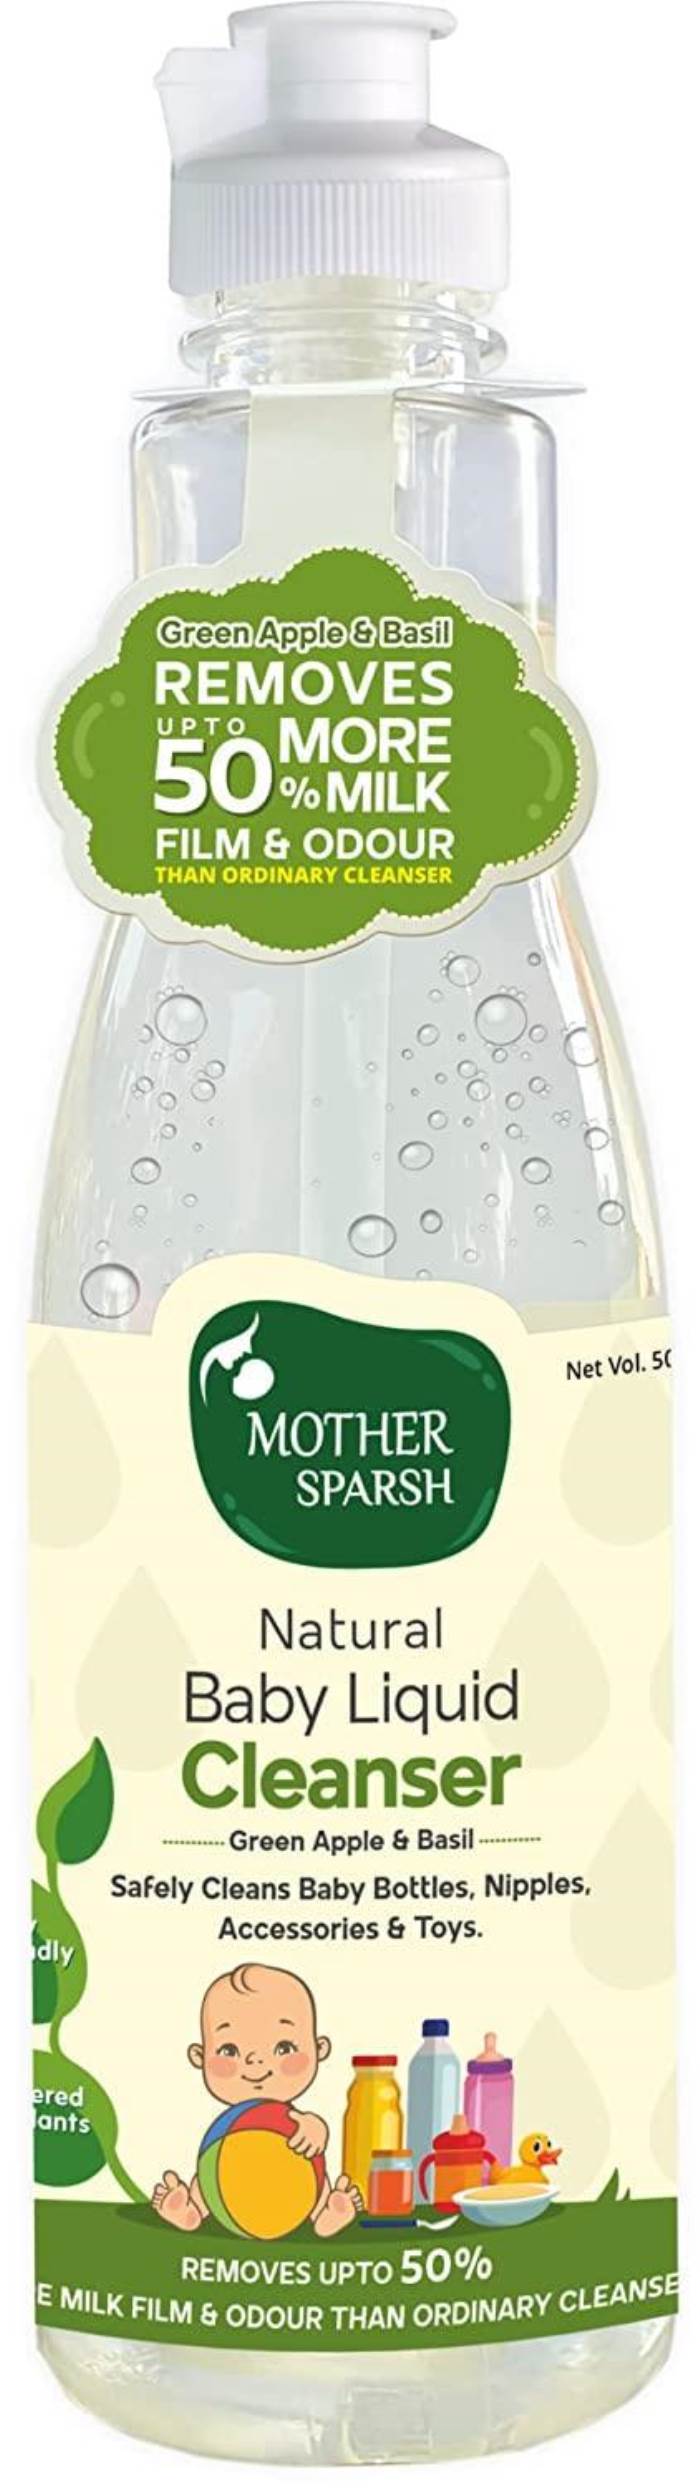 Mother Sparsh Plant Powered Natural Baby Liquid Cleanser with Basil & Green Apple Extract | for Baby Bottles, Nipples, A